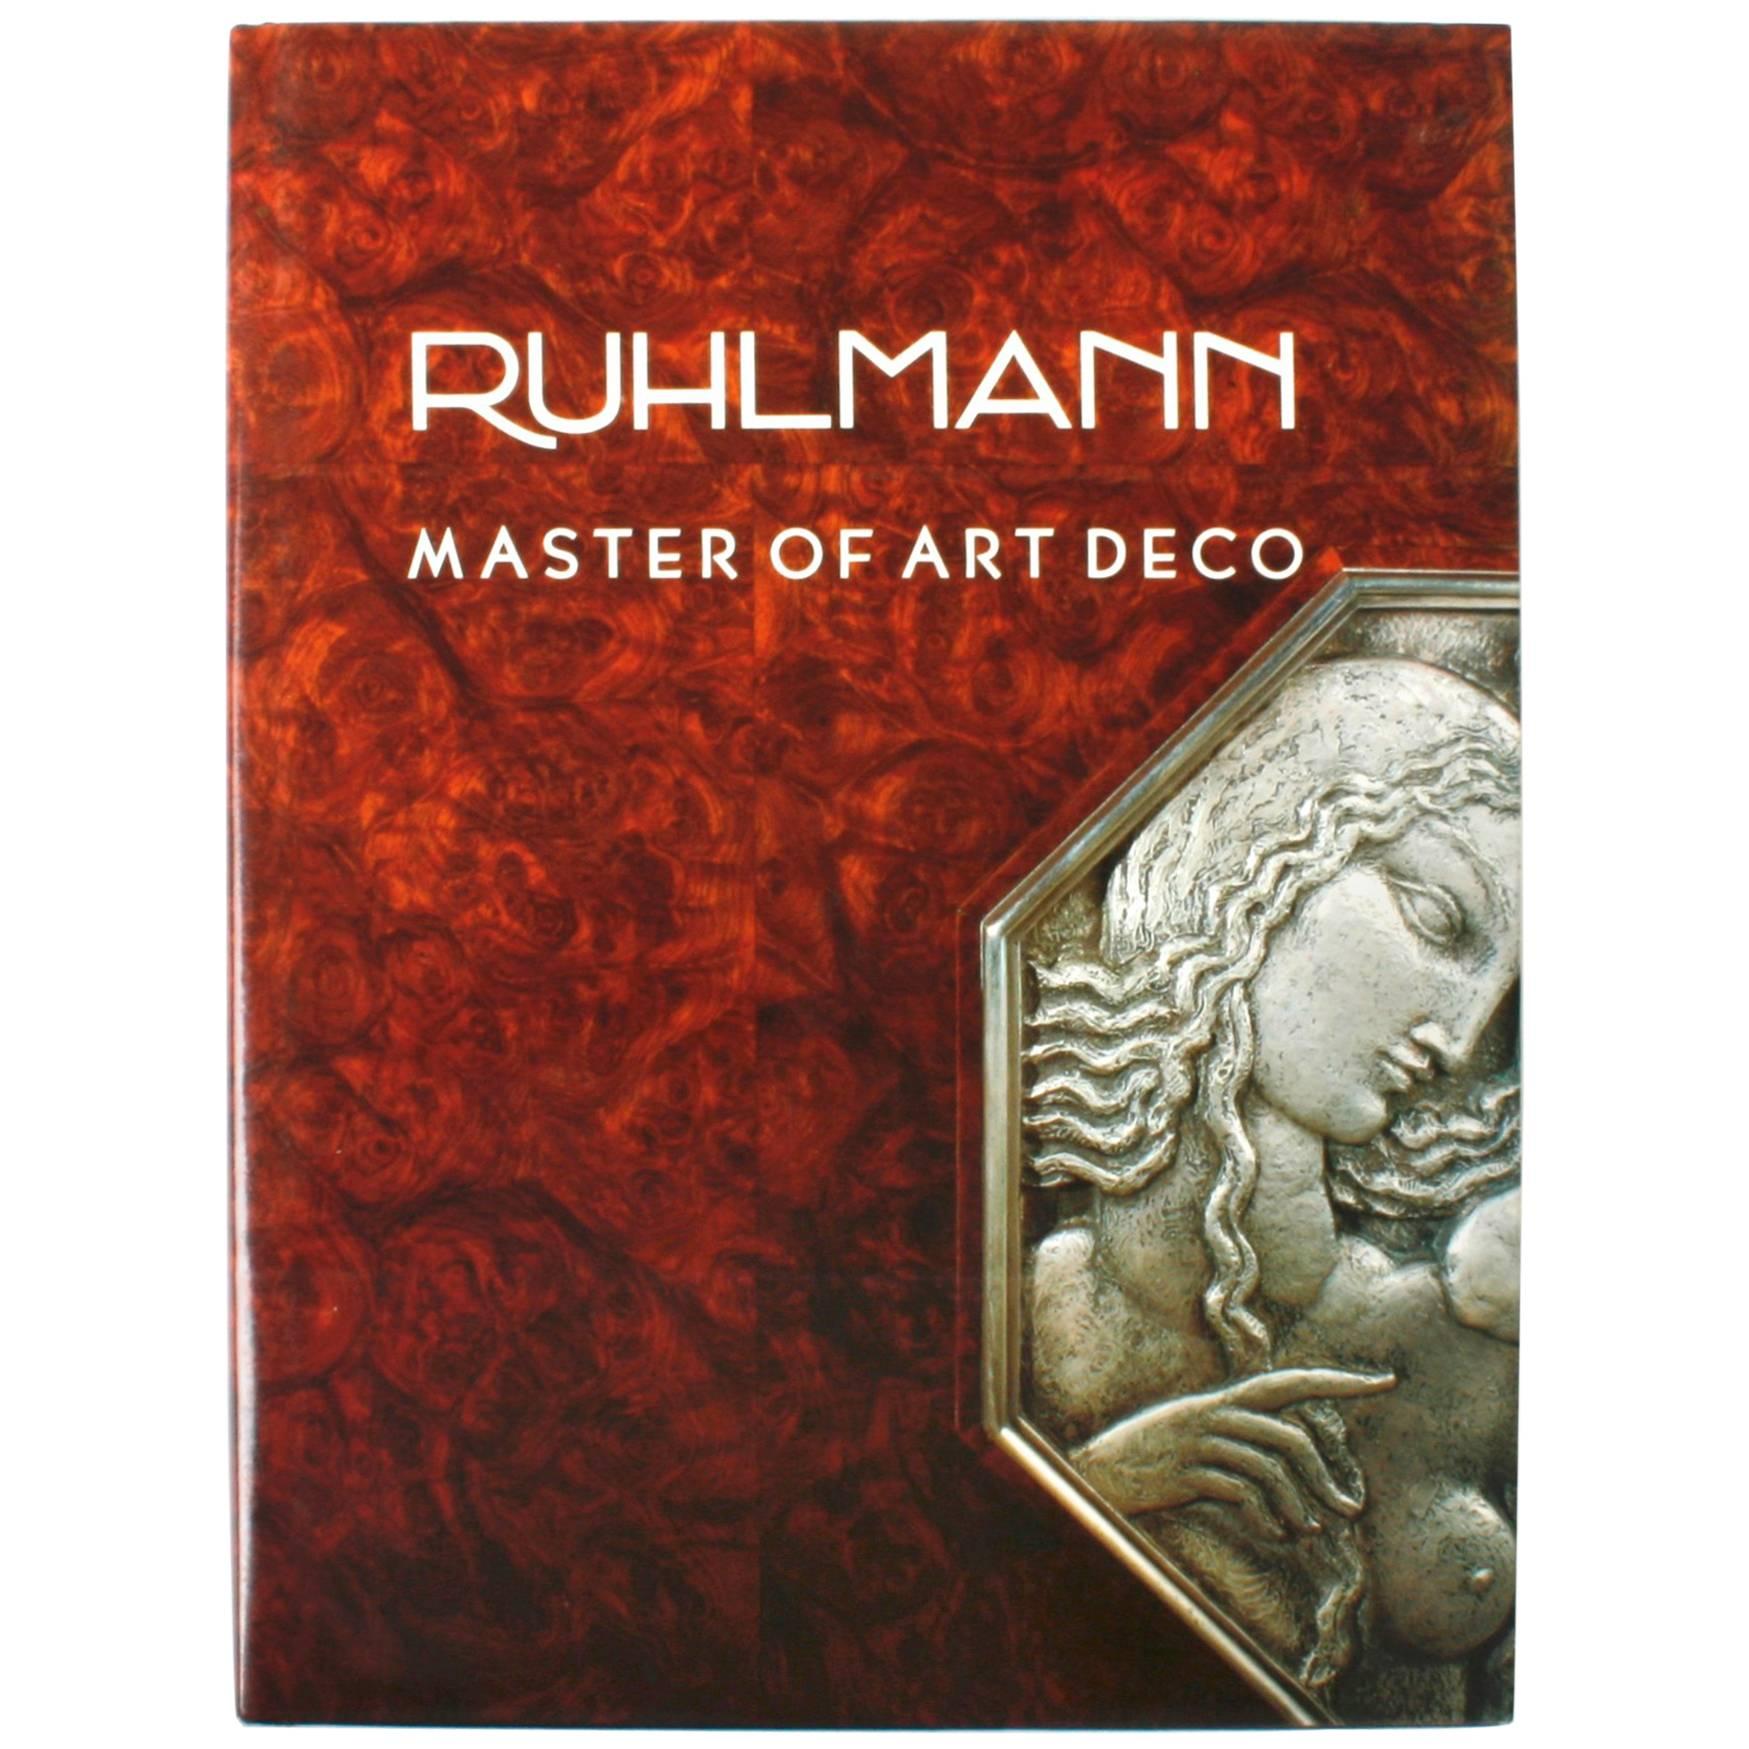 Ruhlmann, Master of Art Deco by Florence Camard, First Edition